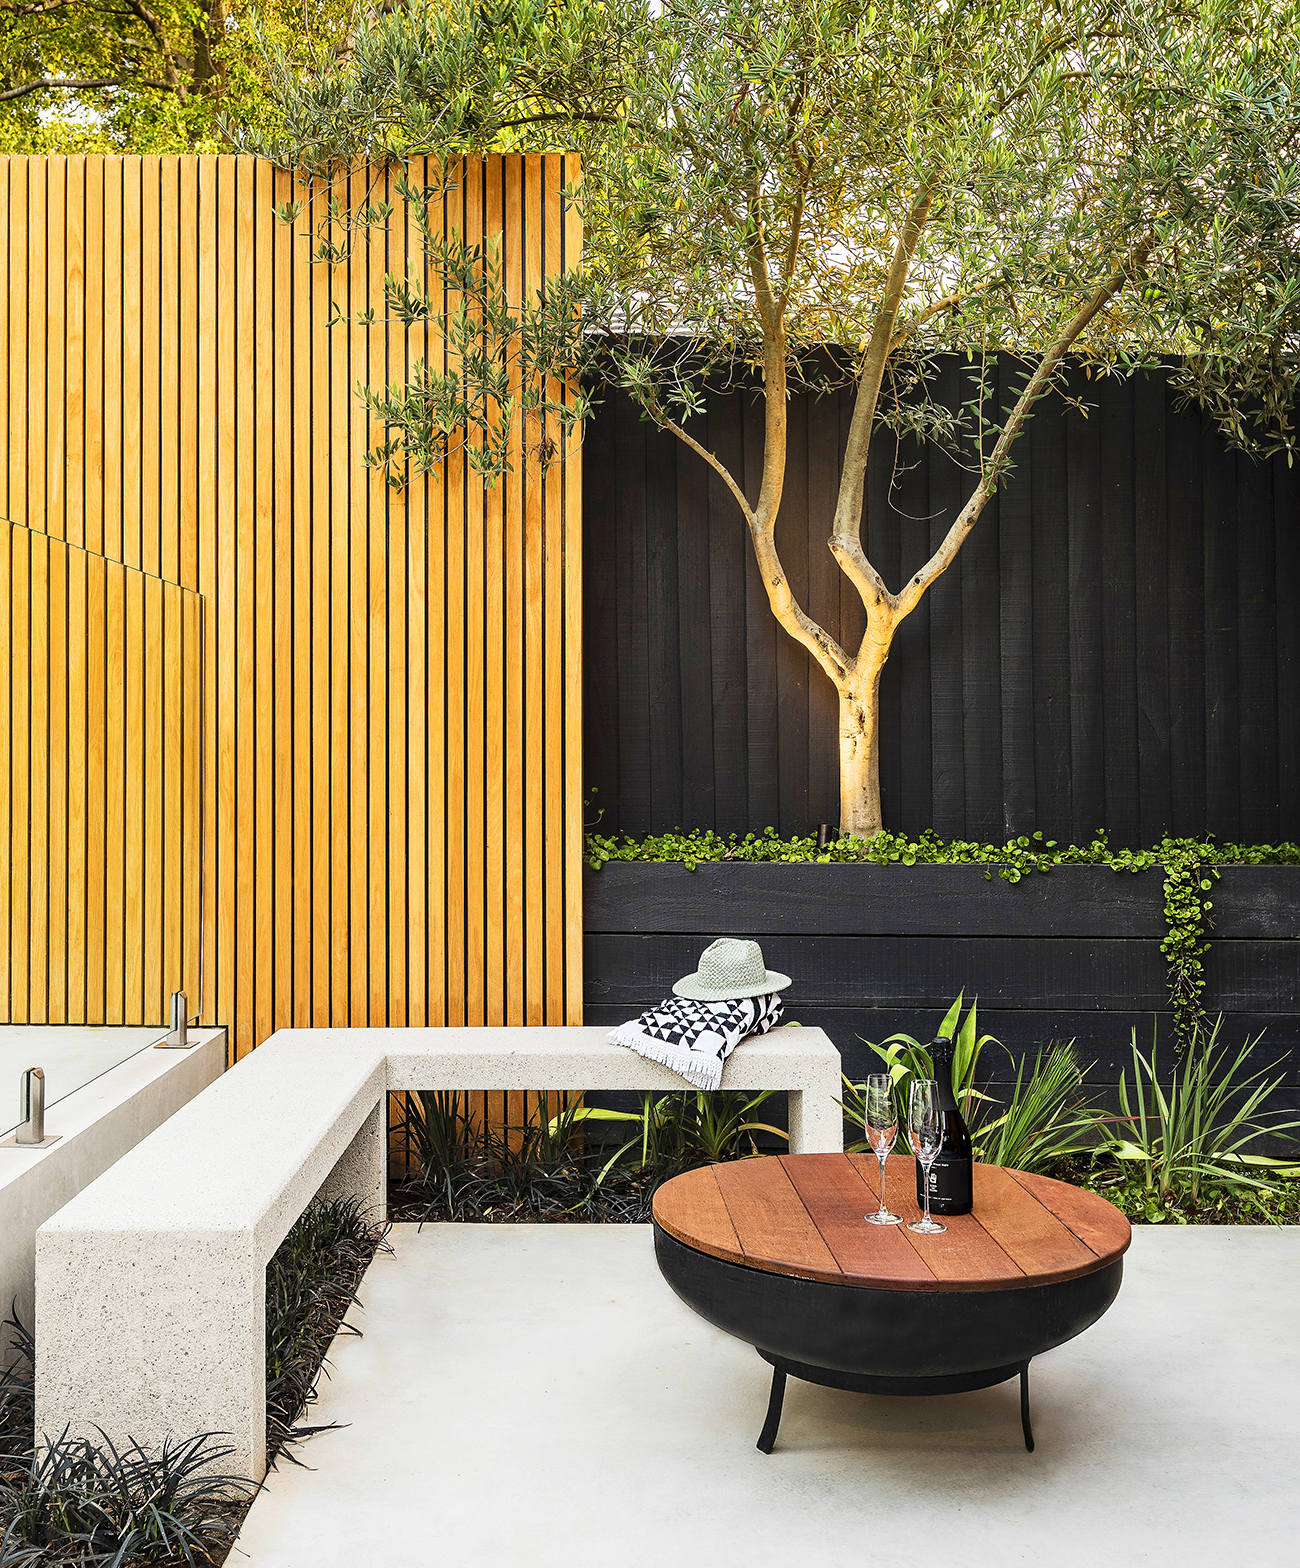 Esjay Landscapes - Camberwell Project